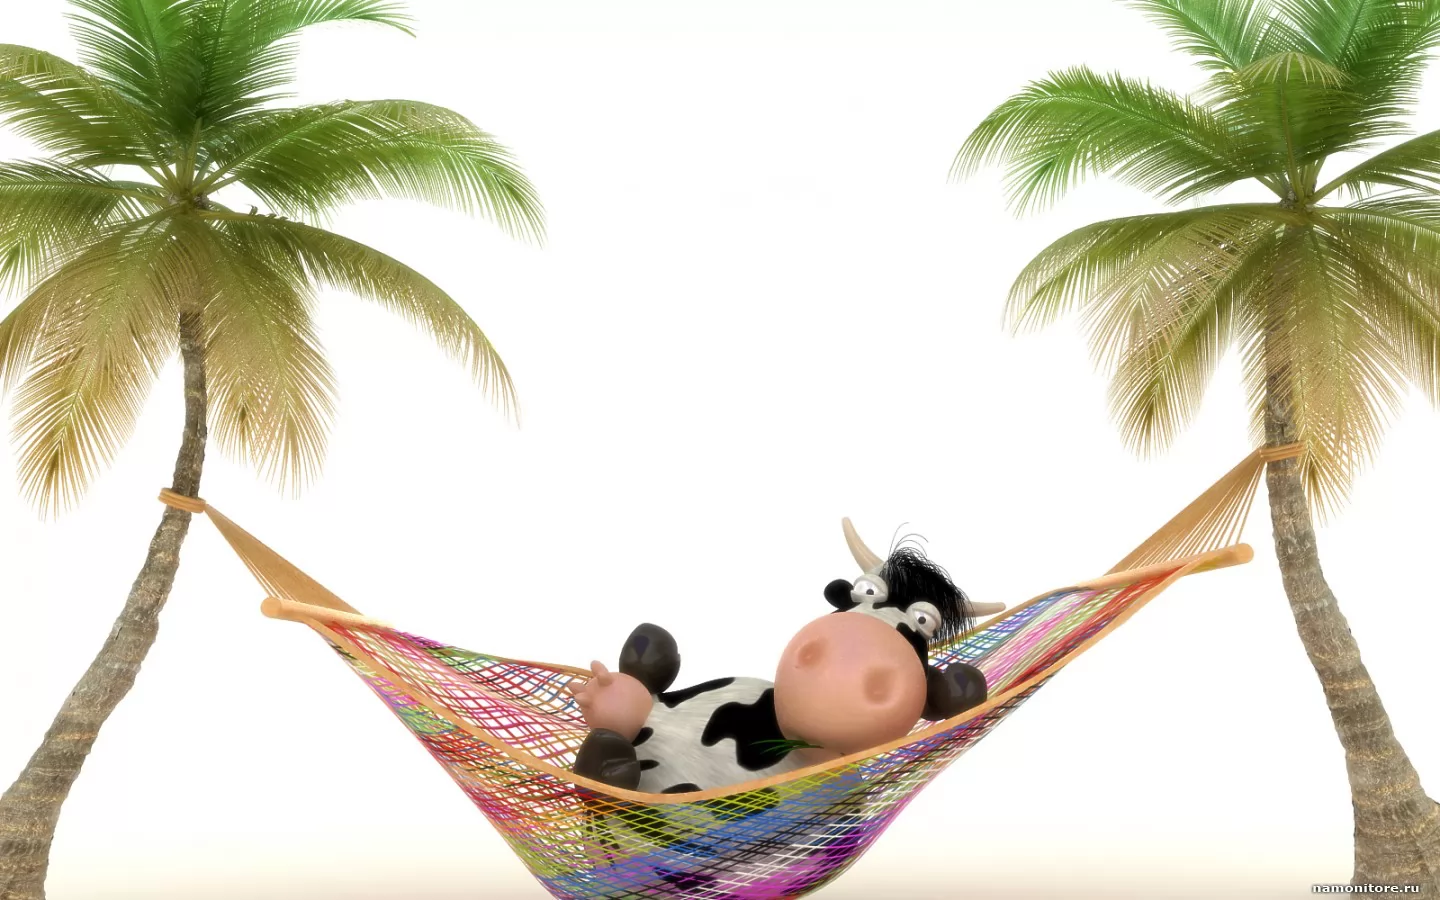 Cow in a hammock, animals, cows, drawed, humour, palm trees, white x